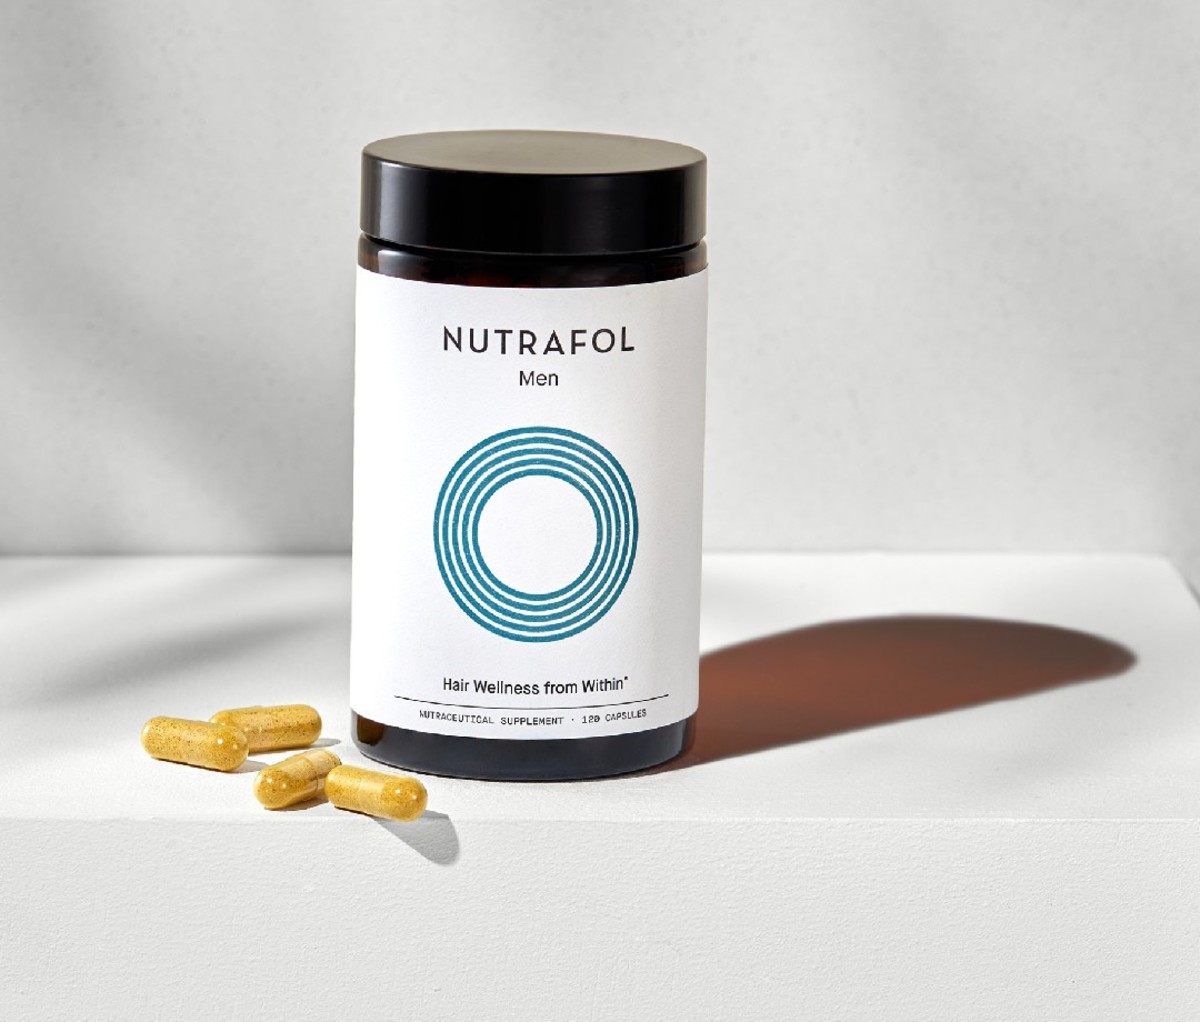 Container of Nutrafol hair loss supplement on a white counter with four loose capsules beside it.